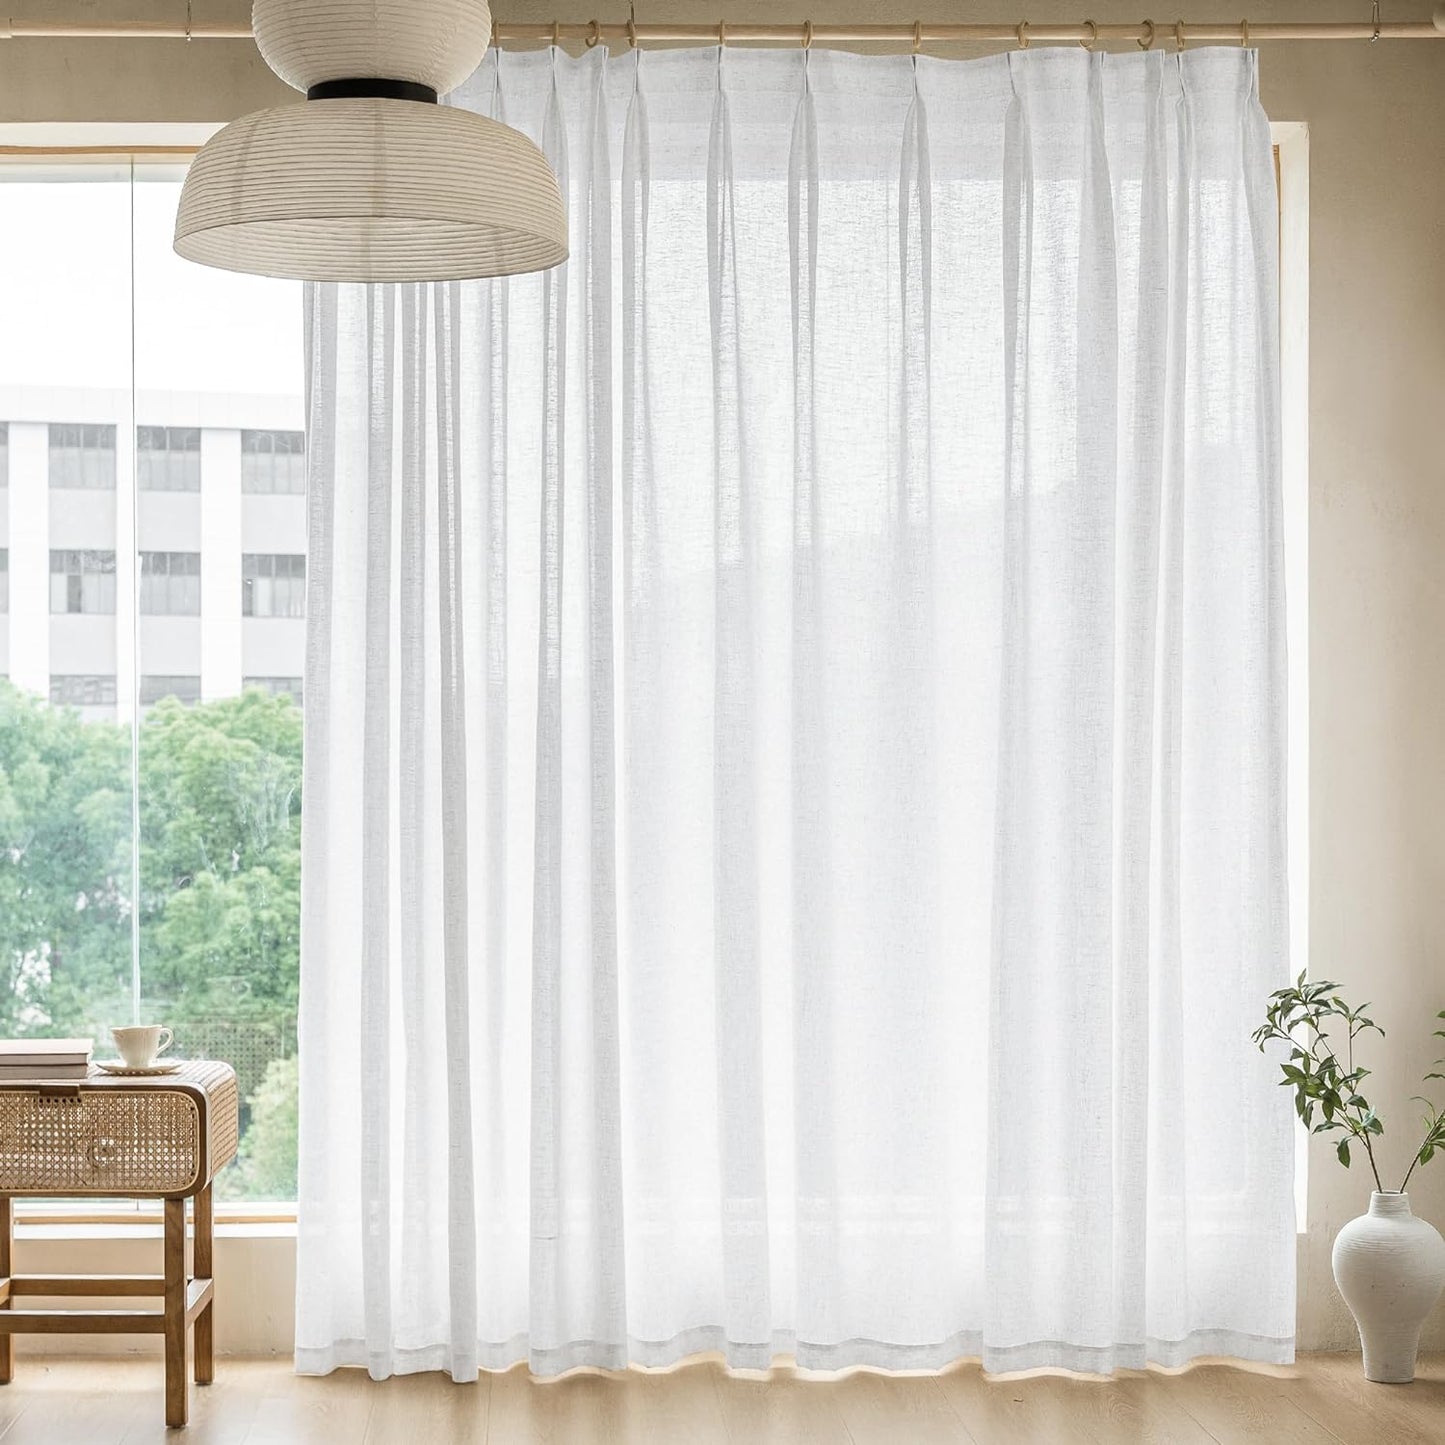 MAIHER Extra Wide Faux Linen Curtains Pinch Pleated, 108 Inches Long Light Filtering Semi Sheer Curtains Patio Door for Living Room, Pinch Pleat Drapes with Hooks (1 Panel, 84" W X 108" L)  MAIHER Beige White 100X96 